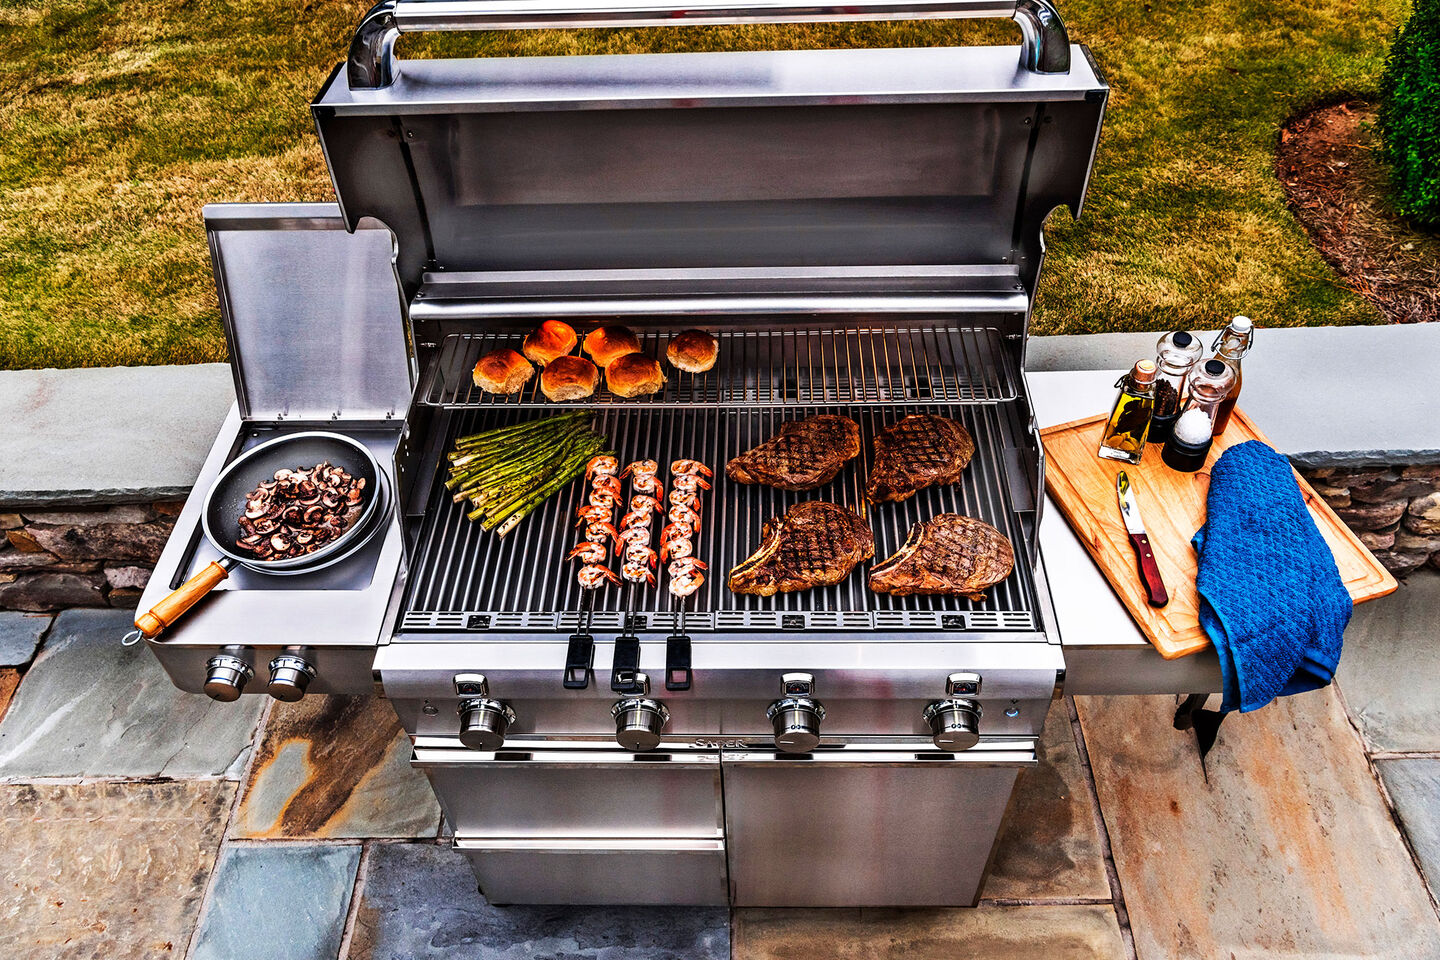 Saber four-burner stainless steel grill